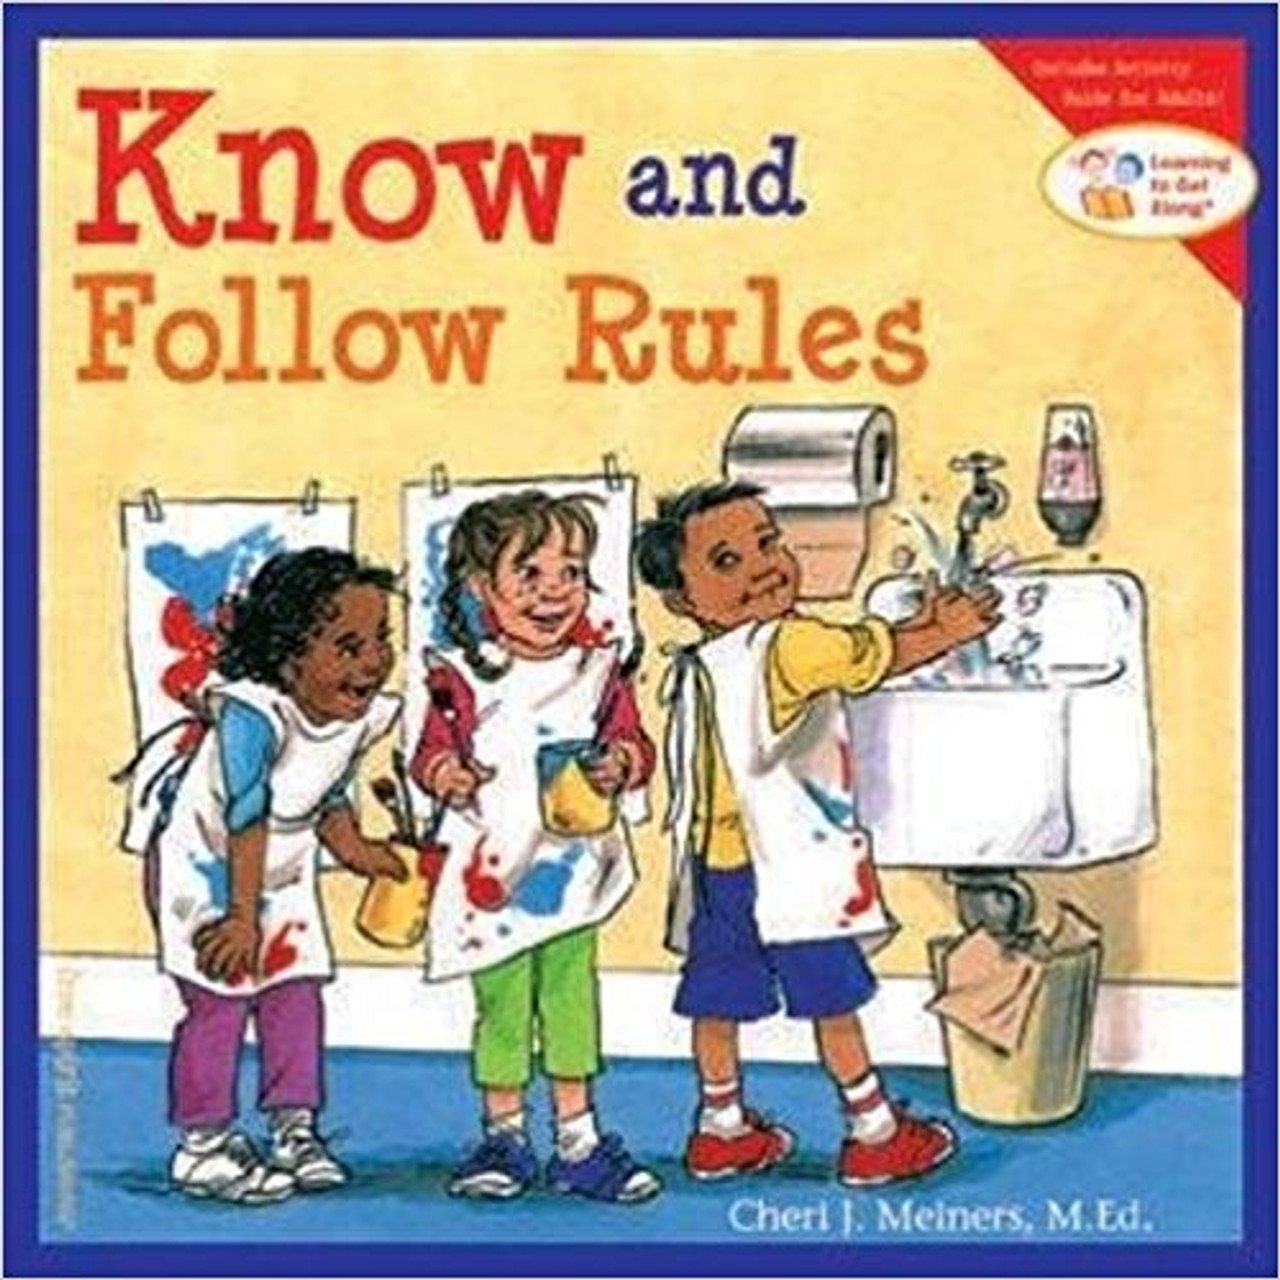 A child who isn't following the rules is a child whos always in trouble. This book starts with simple reasons why we have rules: to help us stay safe, learn, be fair, and get along. Then it presents just four basic rules: Listen, Best Work, Hands and Body to Myself, and Please and Thank You. The focus throughout is on the positive sense of pride that comes with learning to follow rules. Includes questions and activities adults can use to reinforce the ideas and skills being taught.